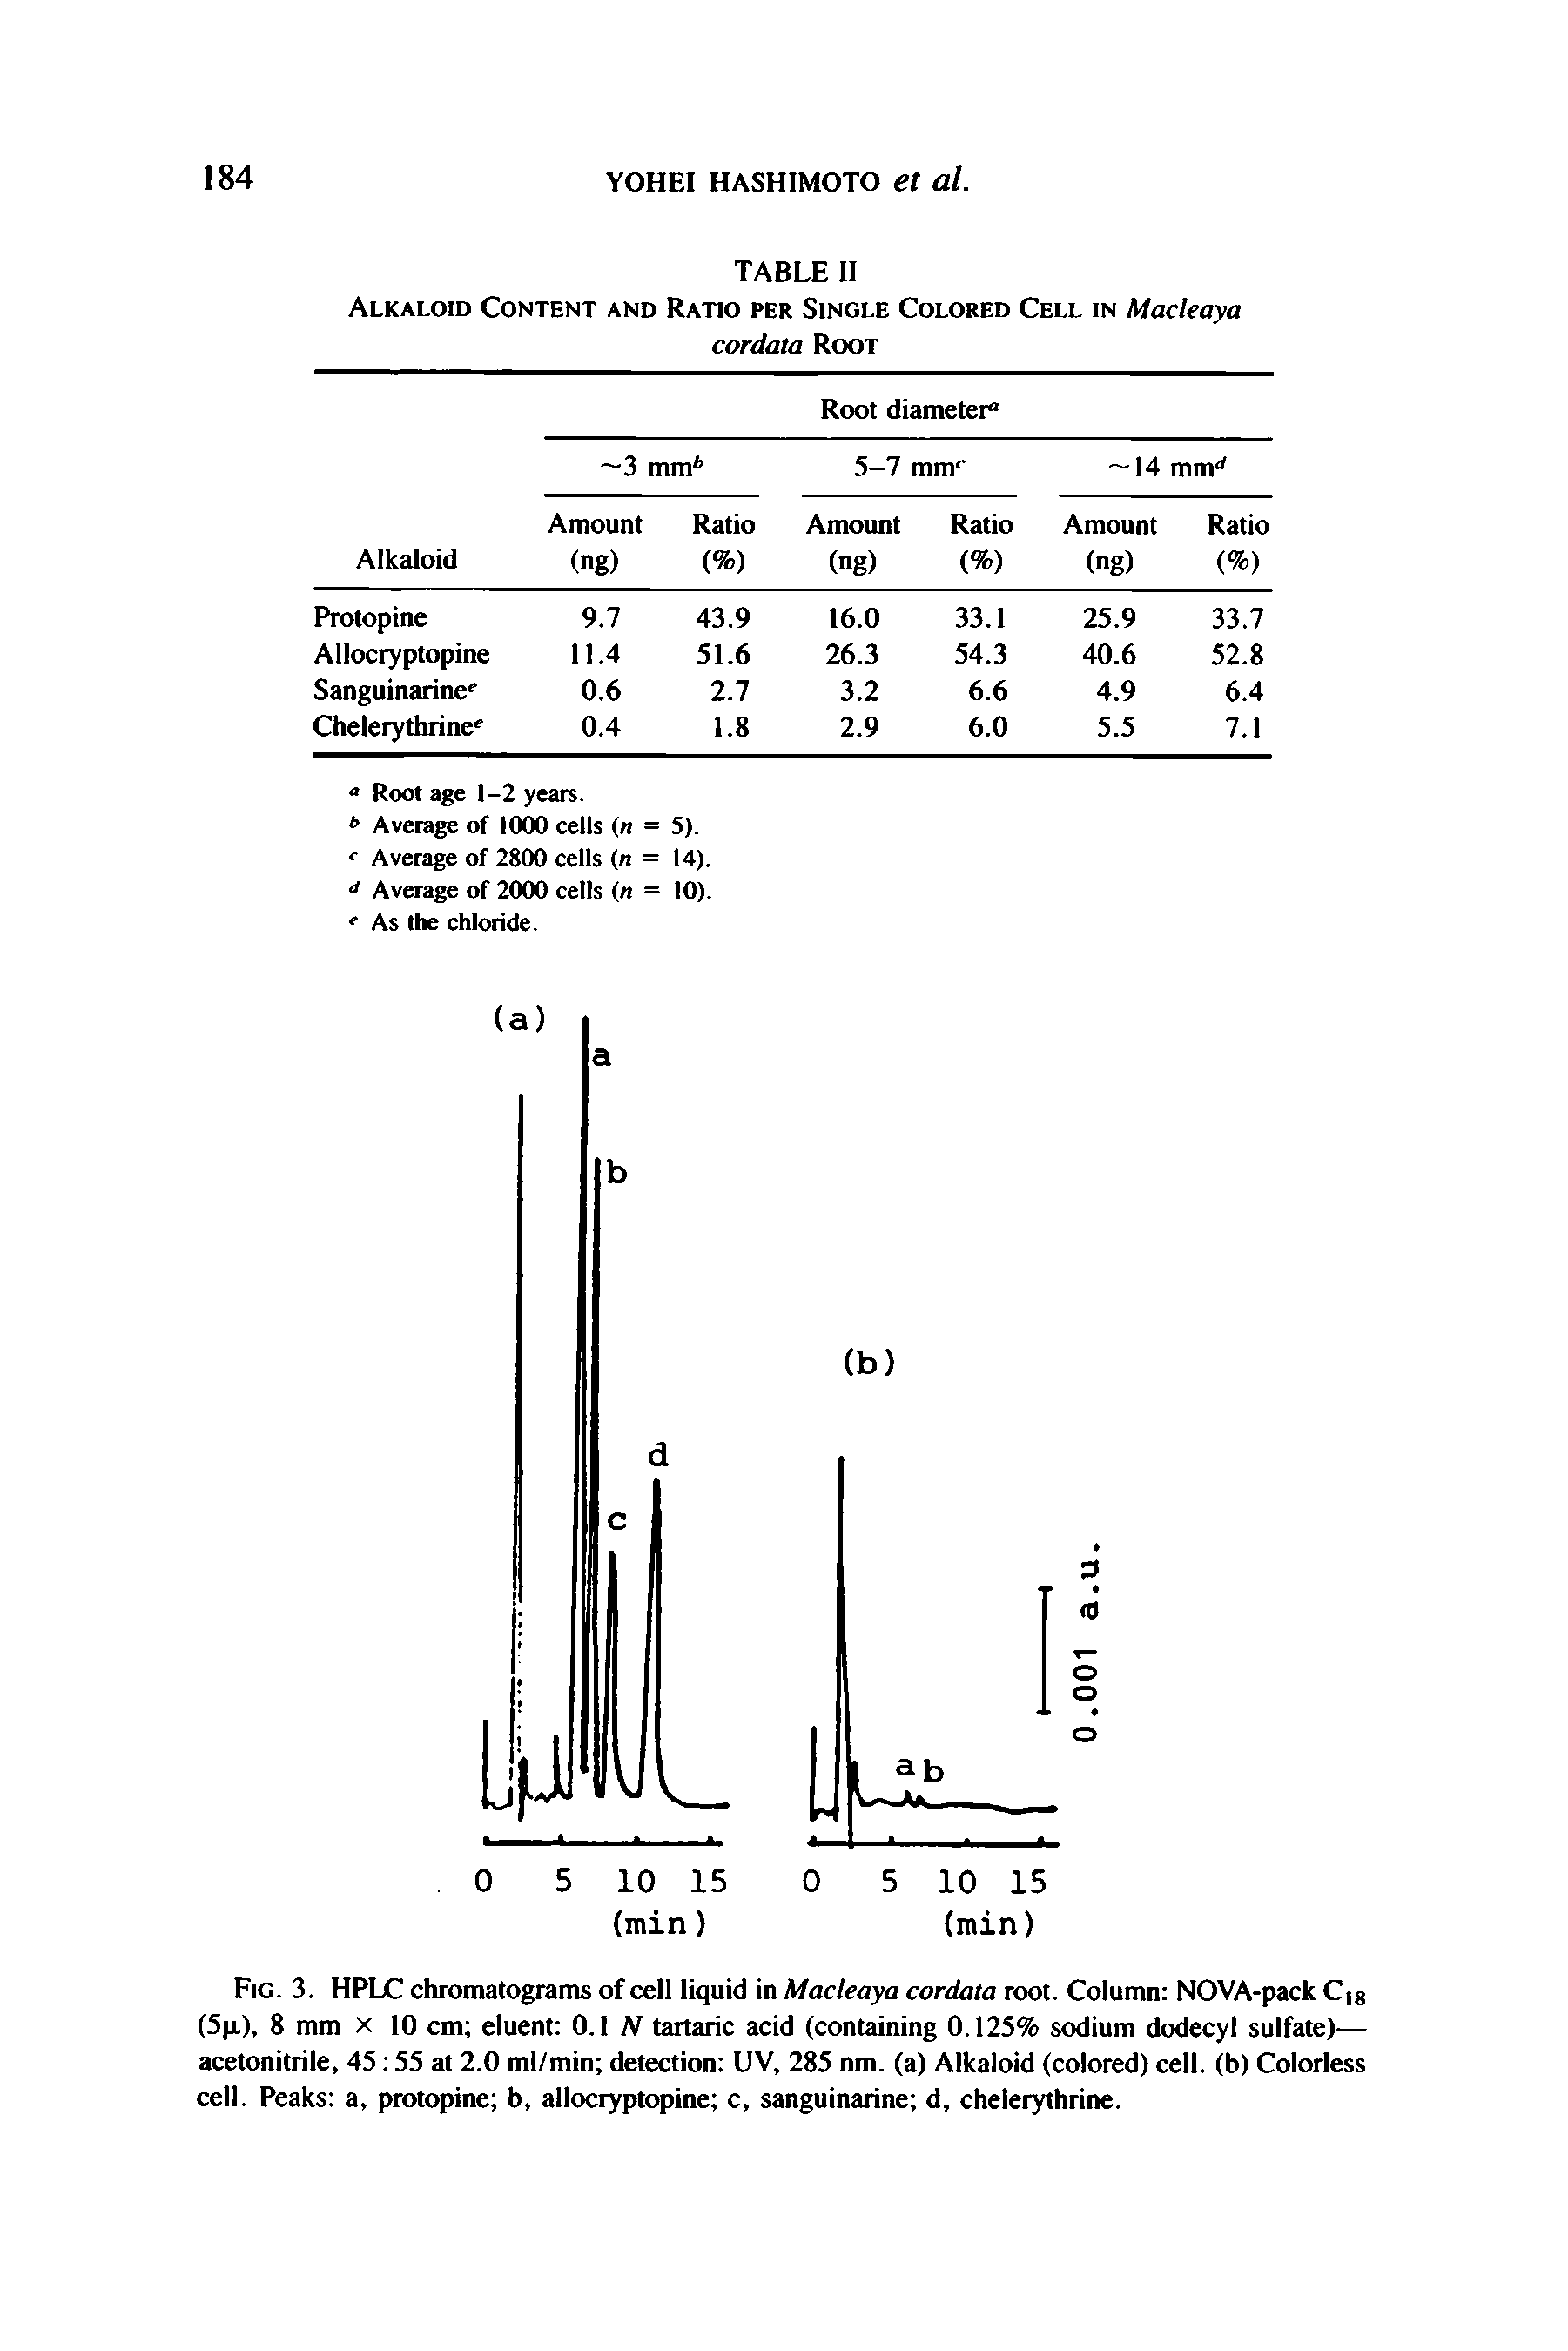 Fig. 3. HPLC chromatograms of cell liquid in Mackaya cordata root. Column NOVA-pack C g (5p.), 8 mm x 10 cm eluent 0.1 iV tartaric acid (containing 0.125% sodium dodecyl sulfate)— acetonitrile, 45 55 at 2.0 ml/min detection UV, 285 nm. (a) Alkaloid (colored) cell, (b) Colorless cell. Peaks a, protopine b, allocryptopine c, sanguinarine d, chelerythrine.